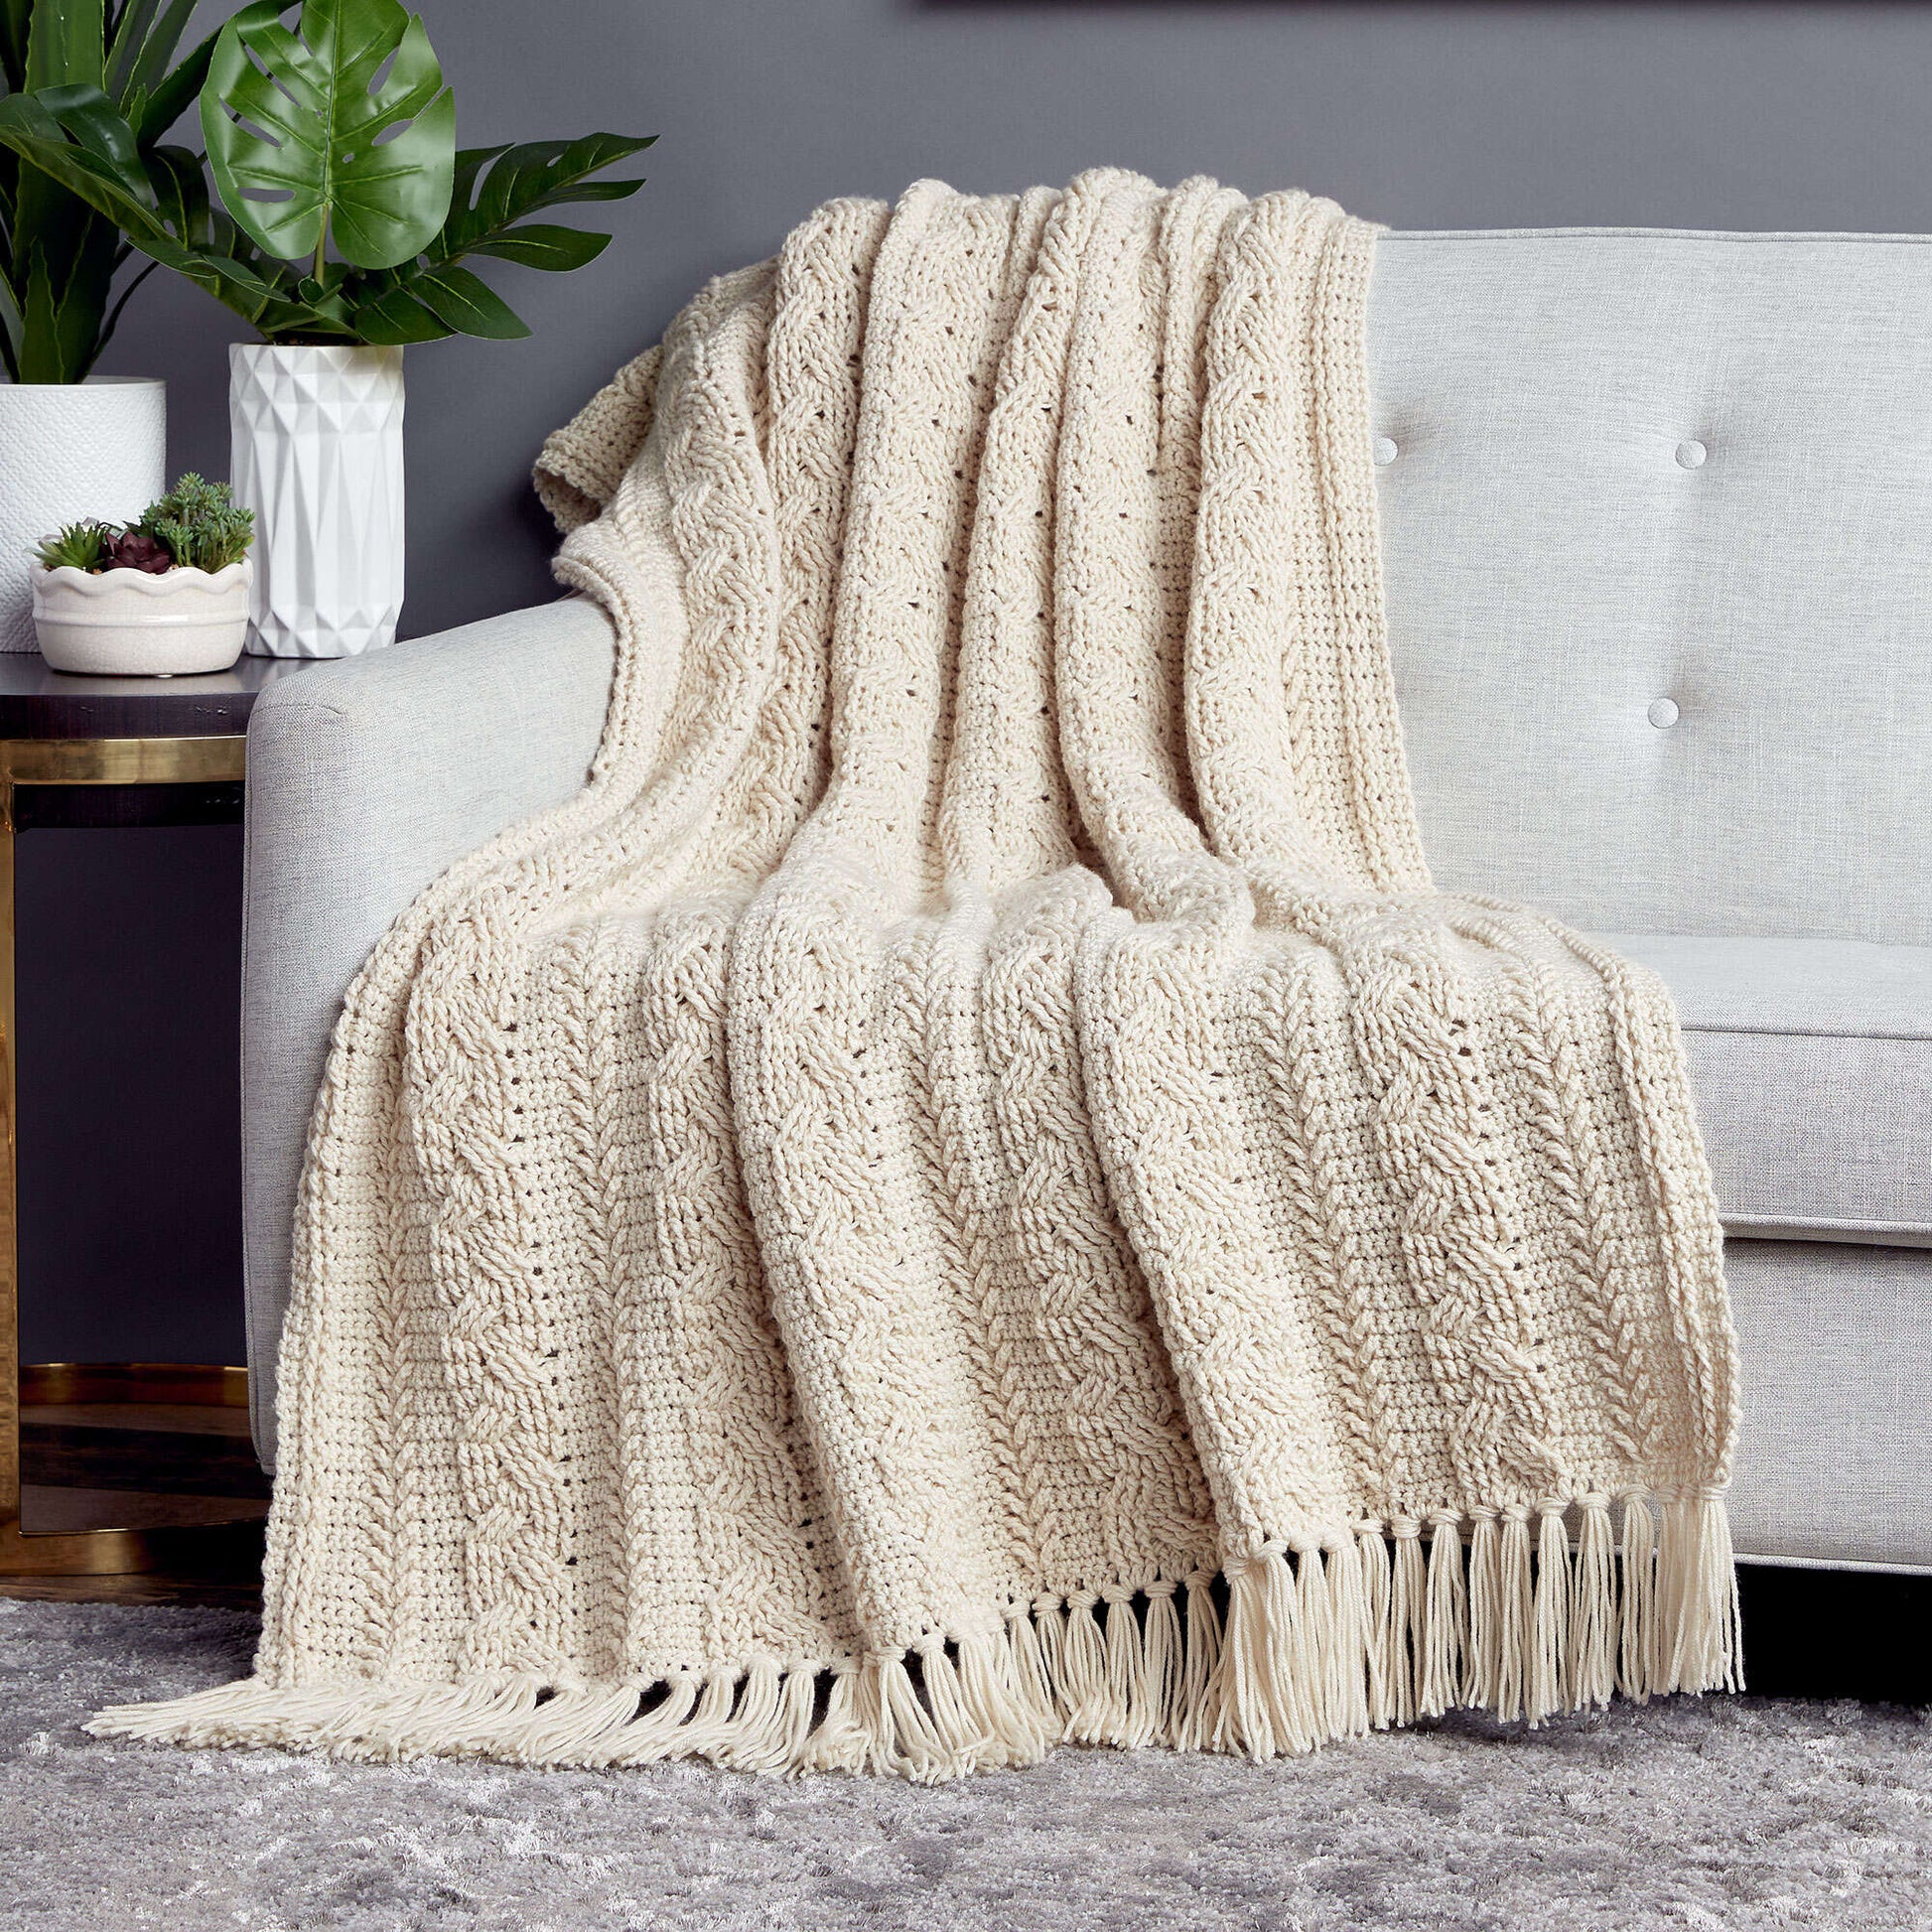 Free Caron Braided Cable Crochet Blanket Pattern